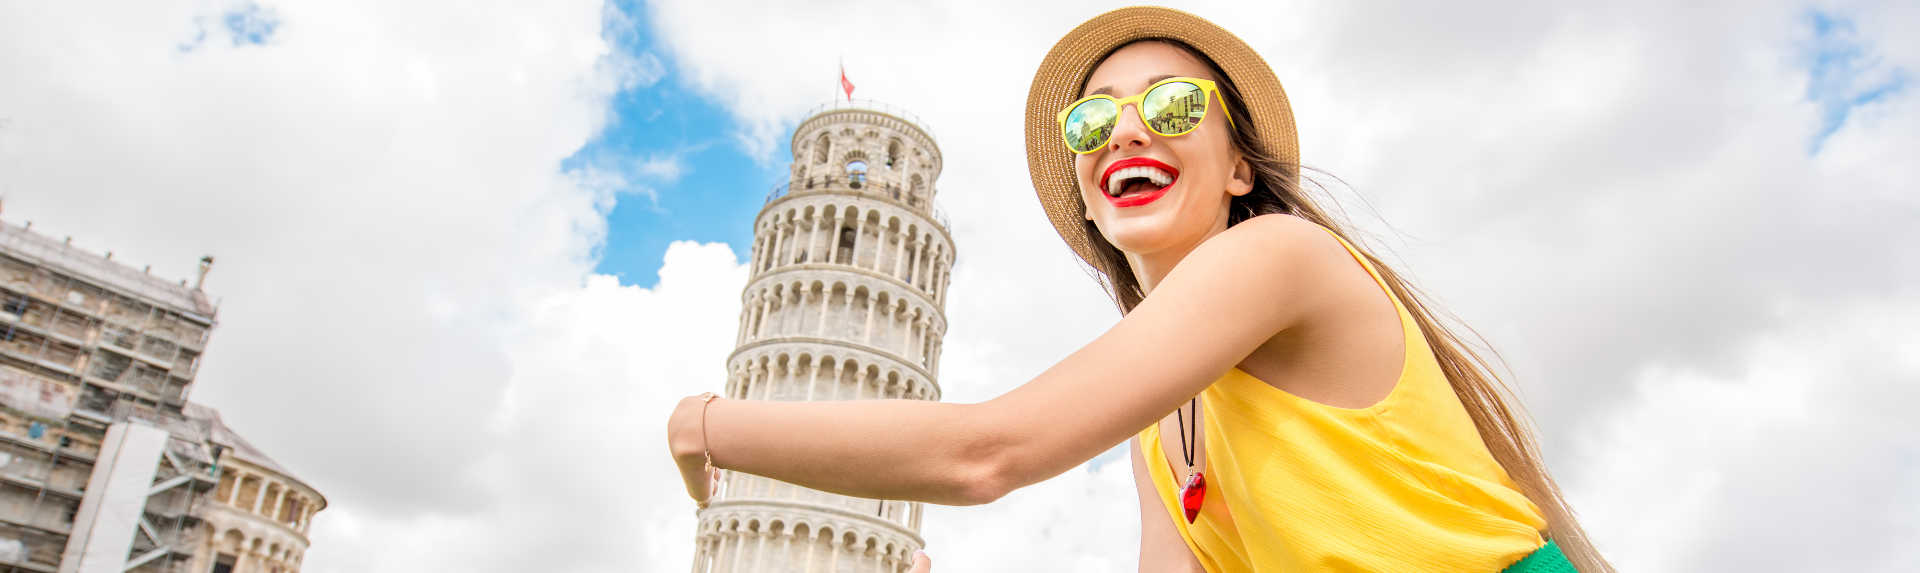 Can you tour the Leaning Tower of Pisa?